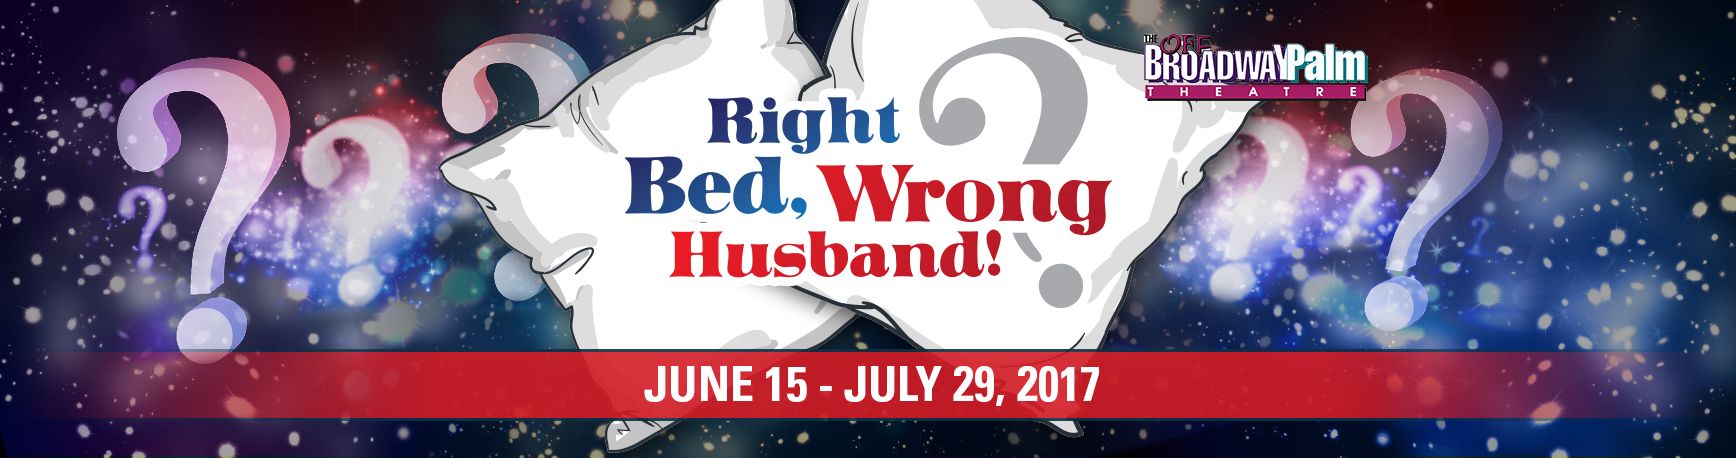 James Putnam is lying Ted in Off Broadway Palm’s ‘Right Bed, Wrong Husband’